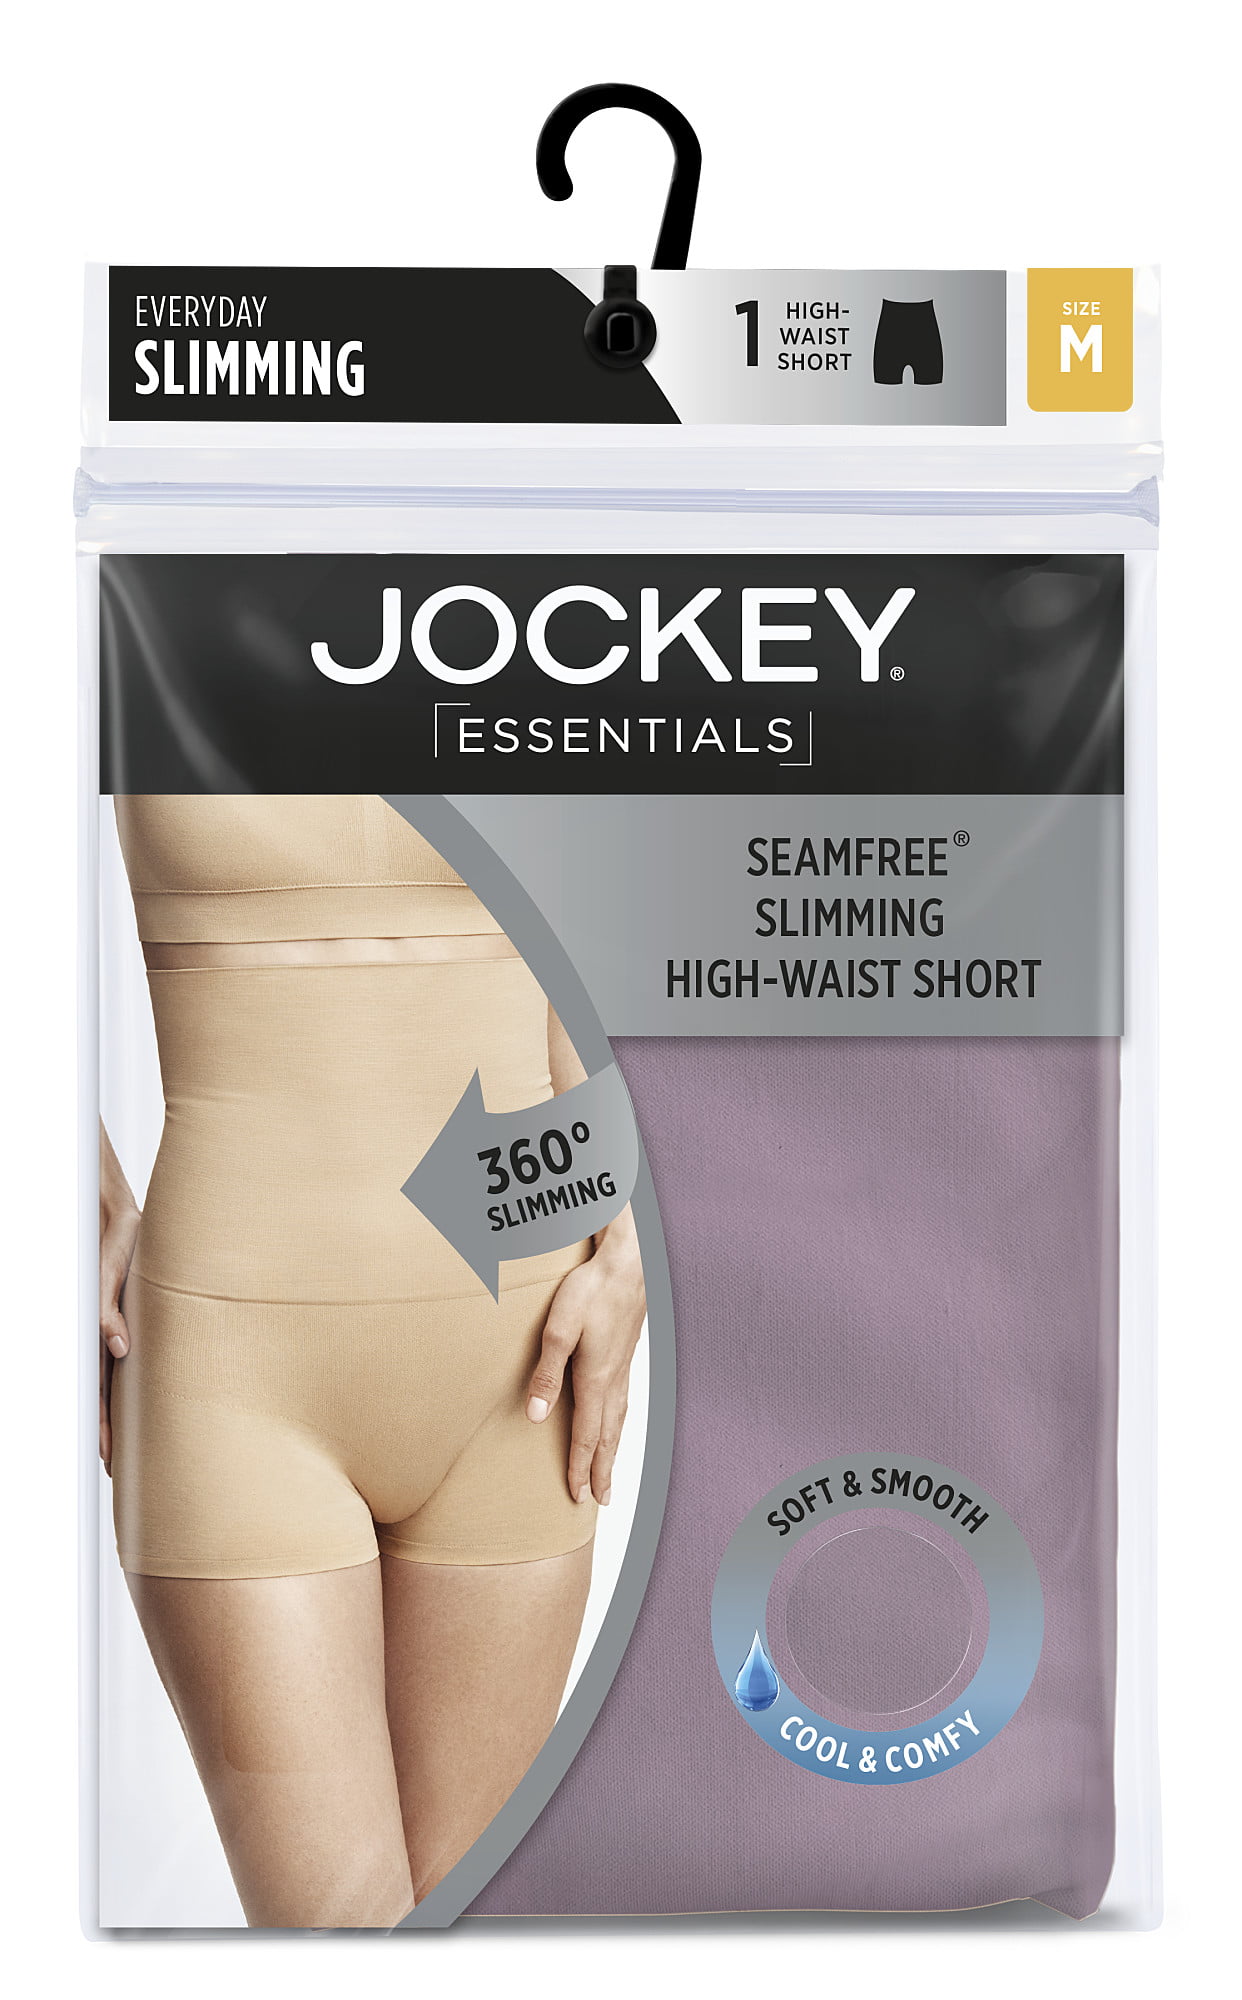 JockeyÆ Essentials Women's SeamfreeÆ No Chafe Slipshort, Cooling Shapewear,  Body Slimming Shorts, Under Dress Smoothing, Sizes Small, Medium, Large,  Extra Large, 2XL, 3XL, 4XL, 5XL, 5361 - DroneUp Delivery